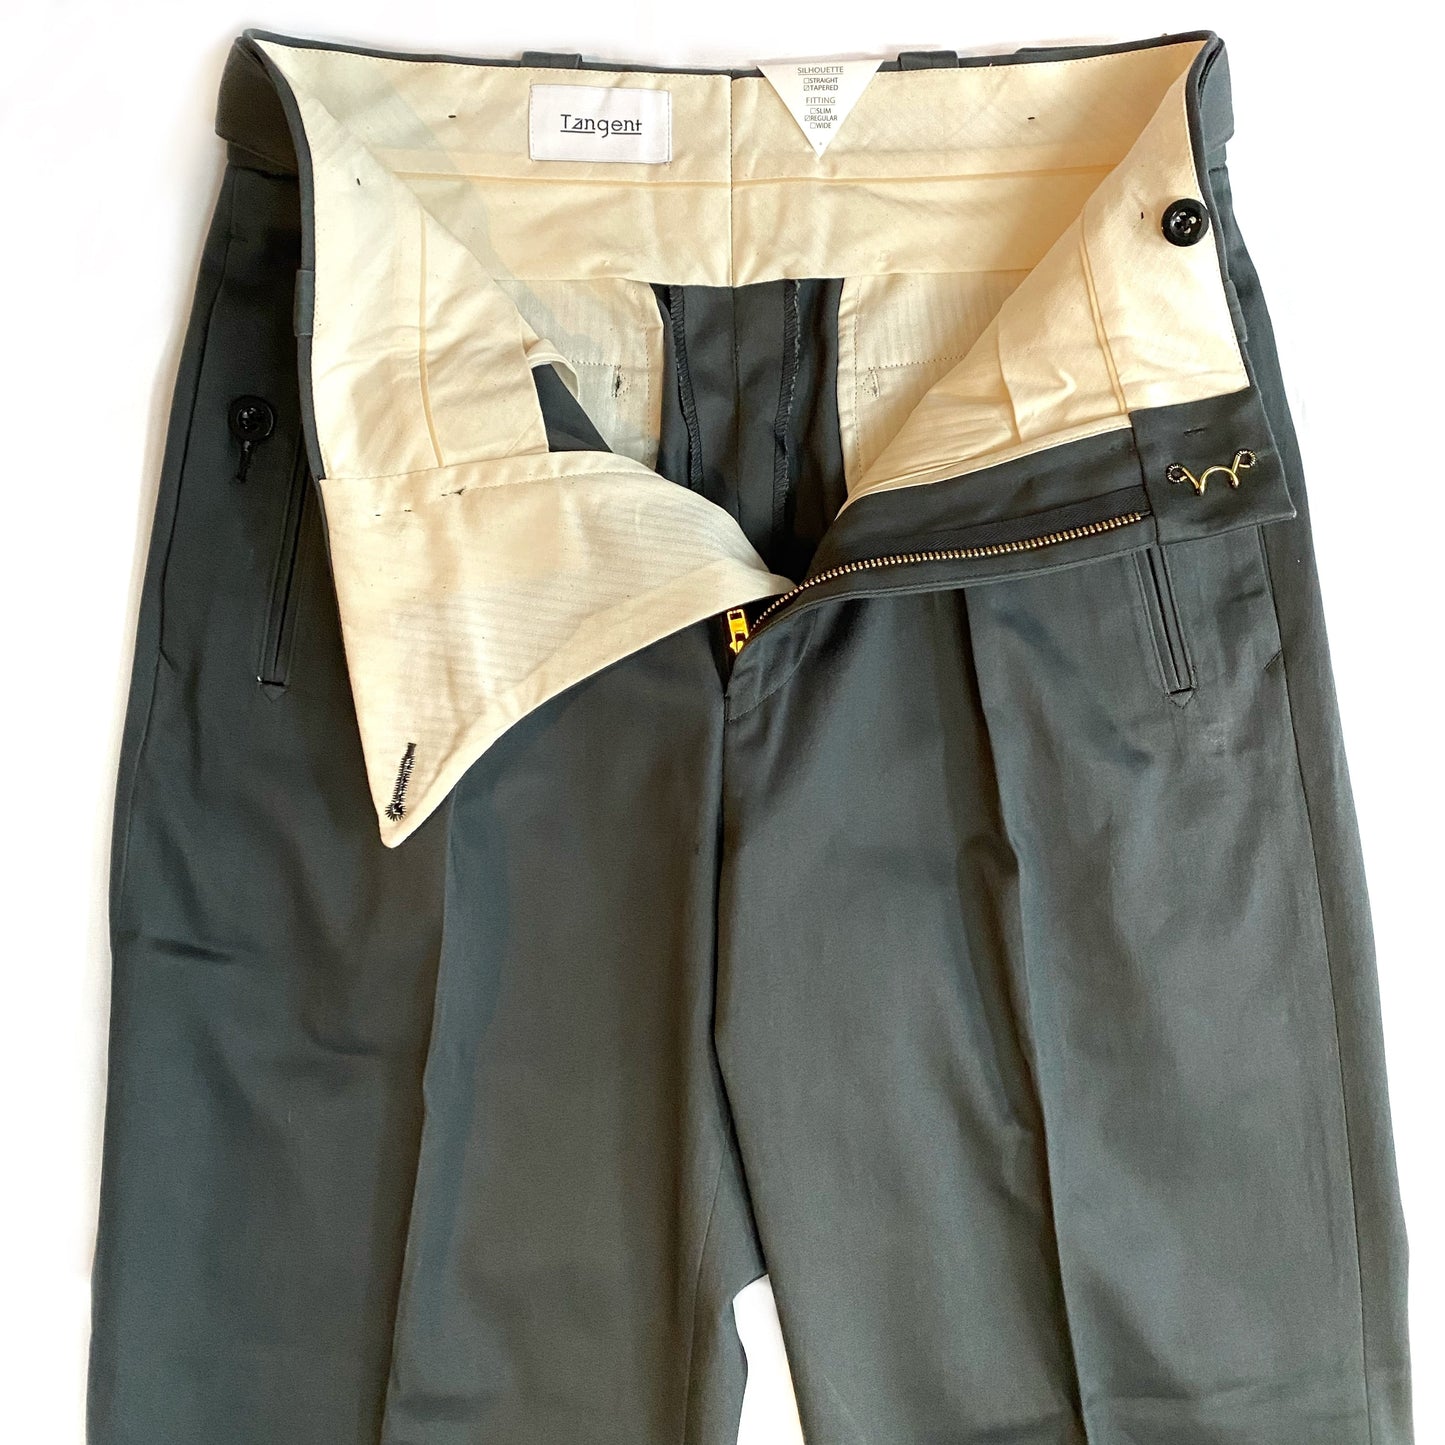 Tangent / Tan04 French Army Adjuster Pants バックサテン